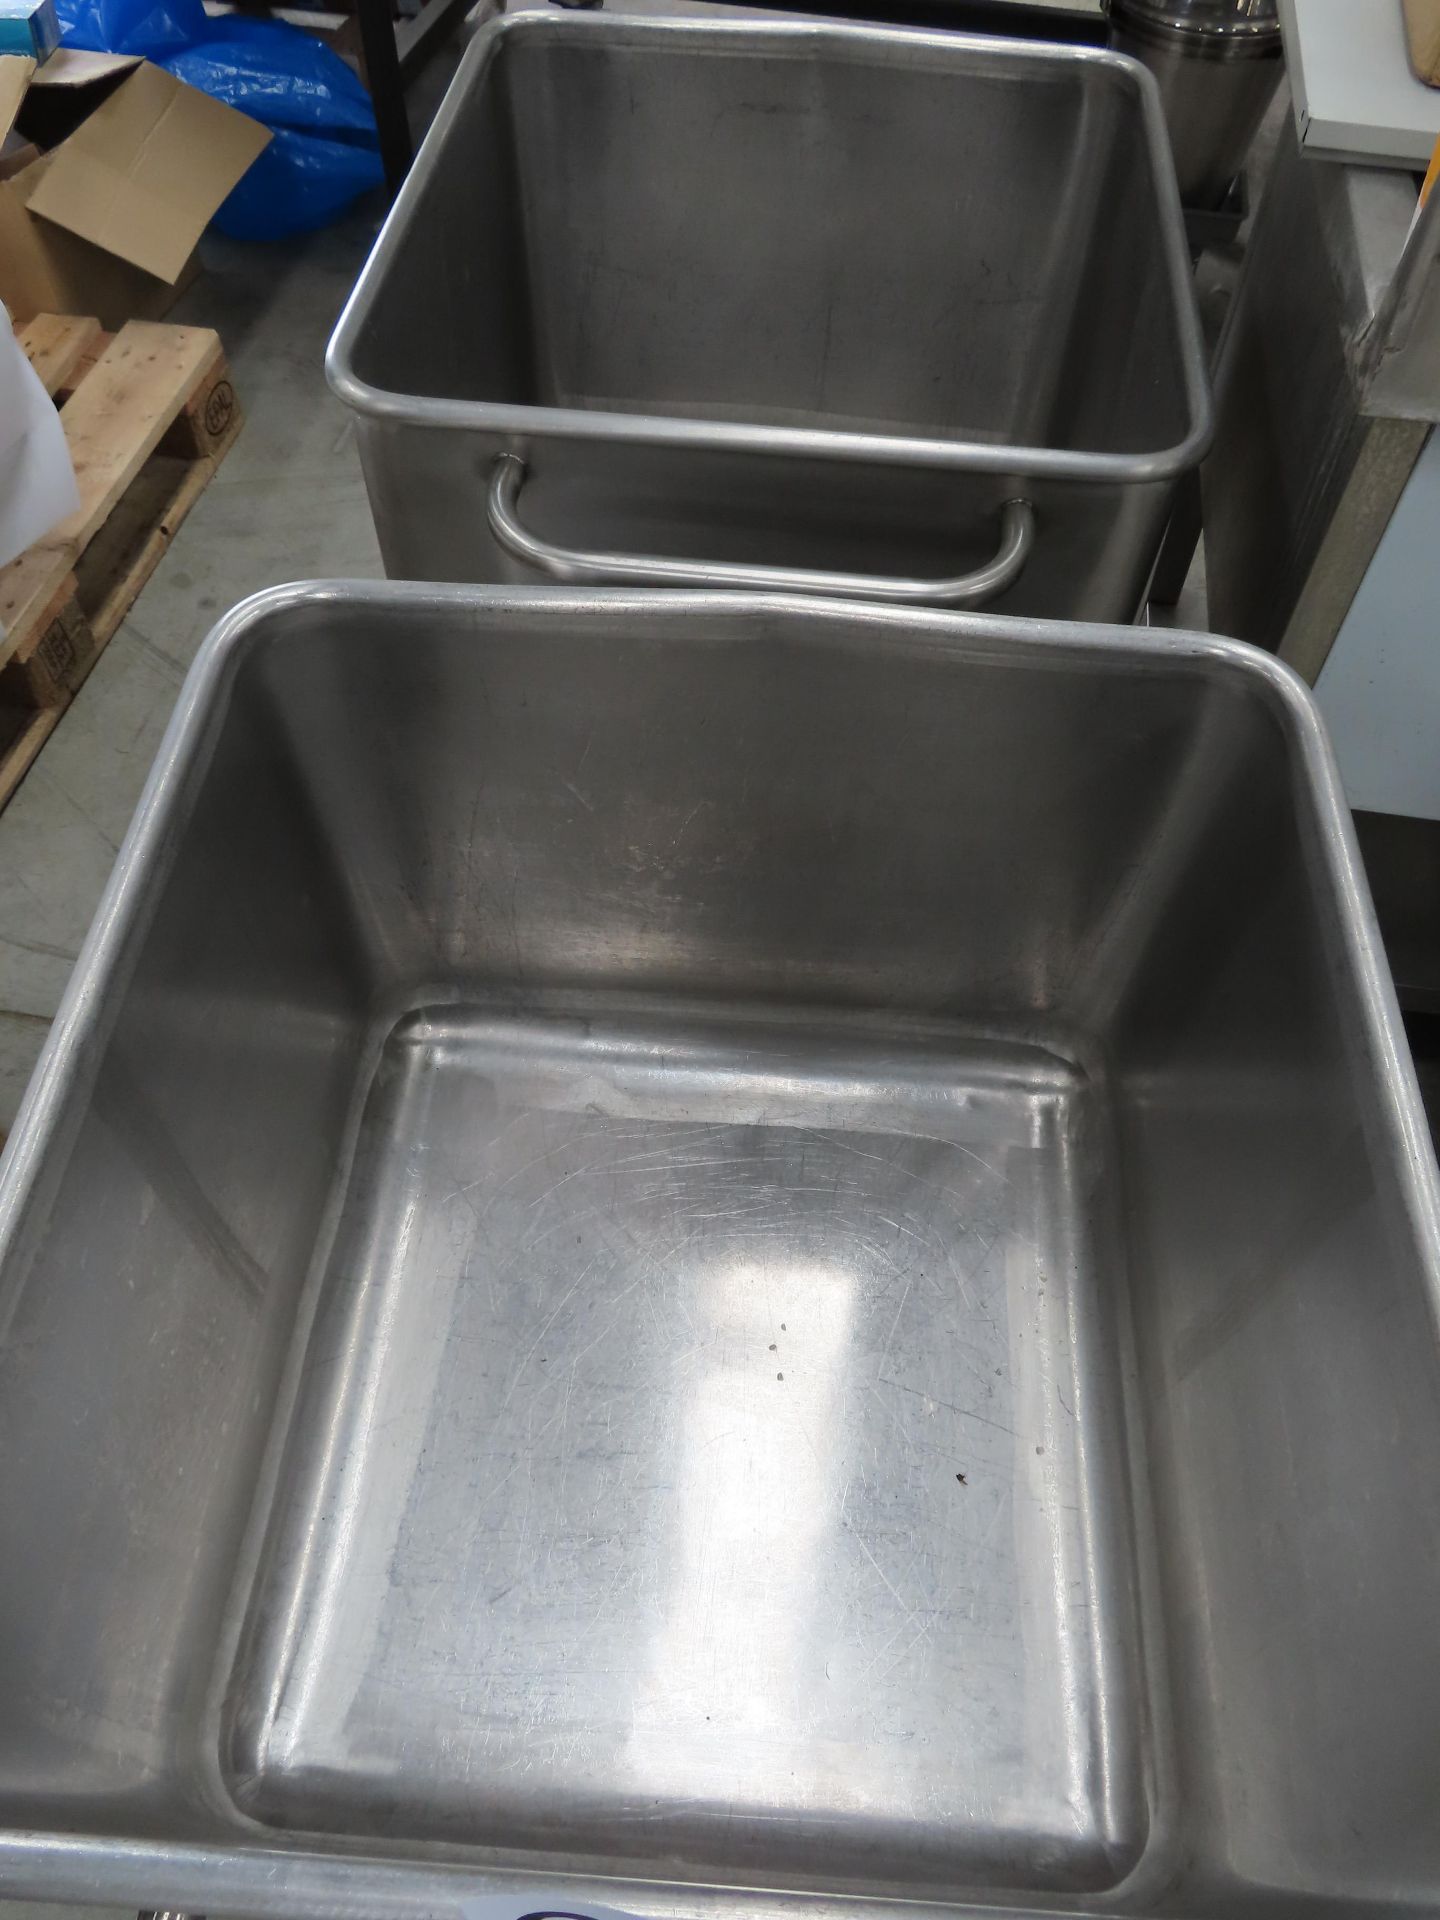 2 X S/S 200 LITRE TOTE BINS. - Image 2 of 3